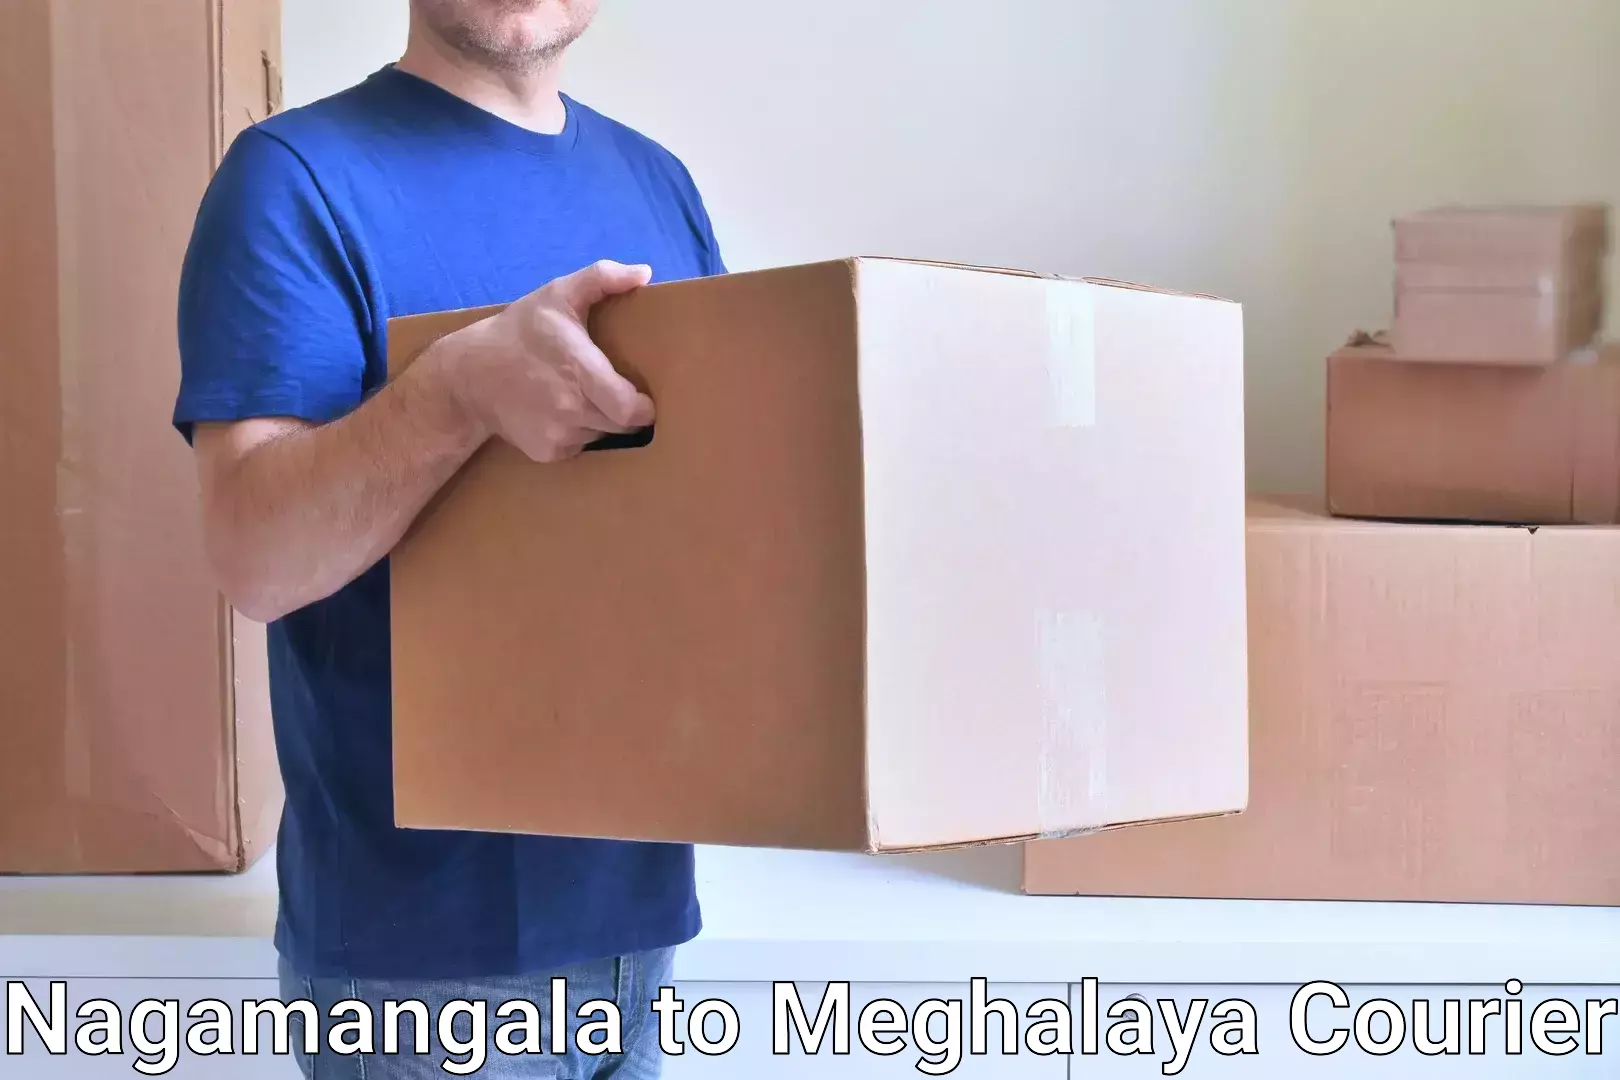 Full-service courier options in Nagamangala to Cherrapunji